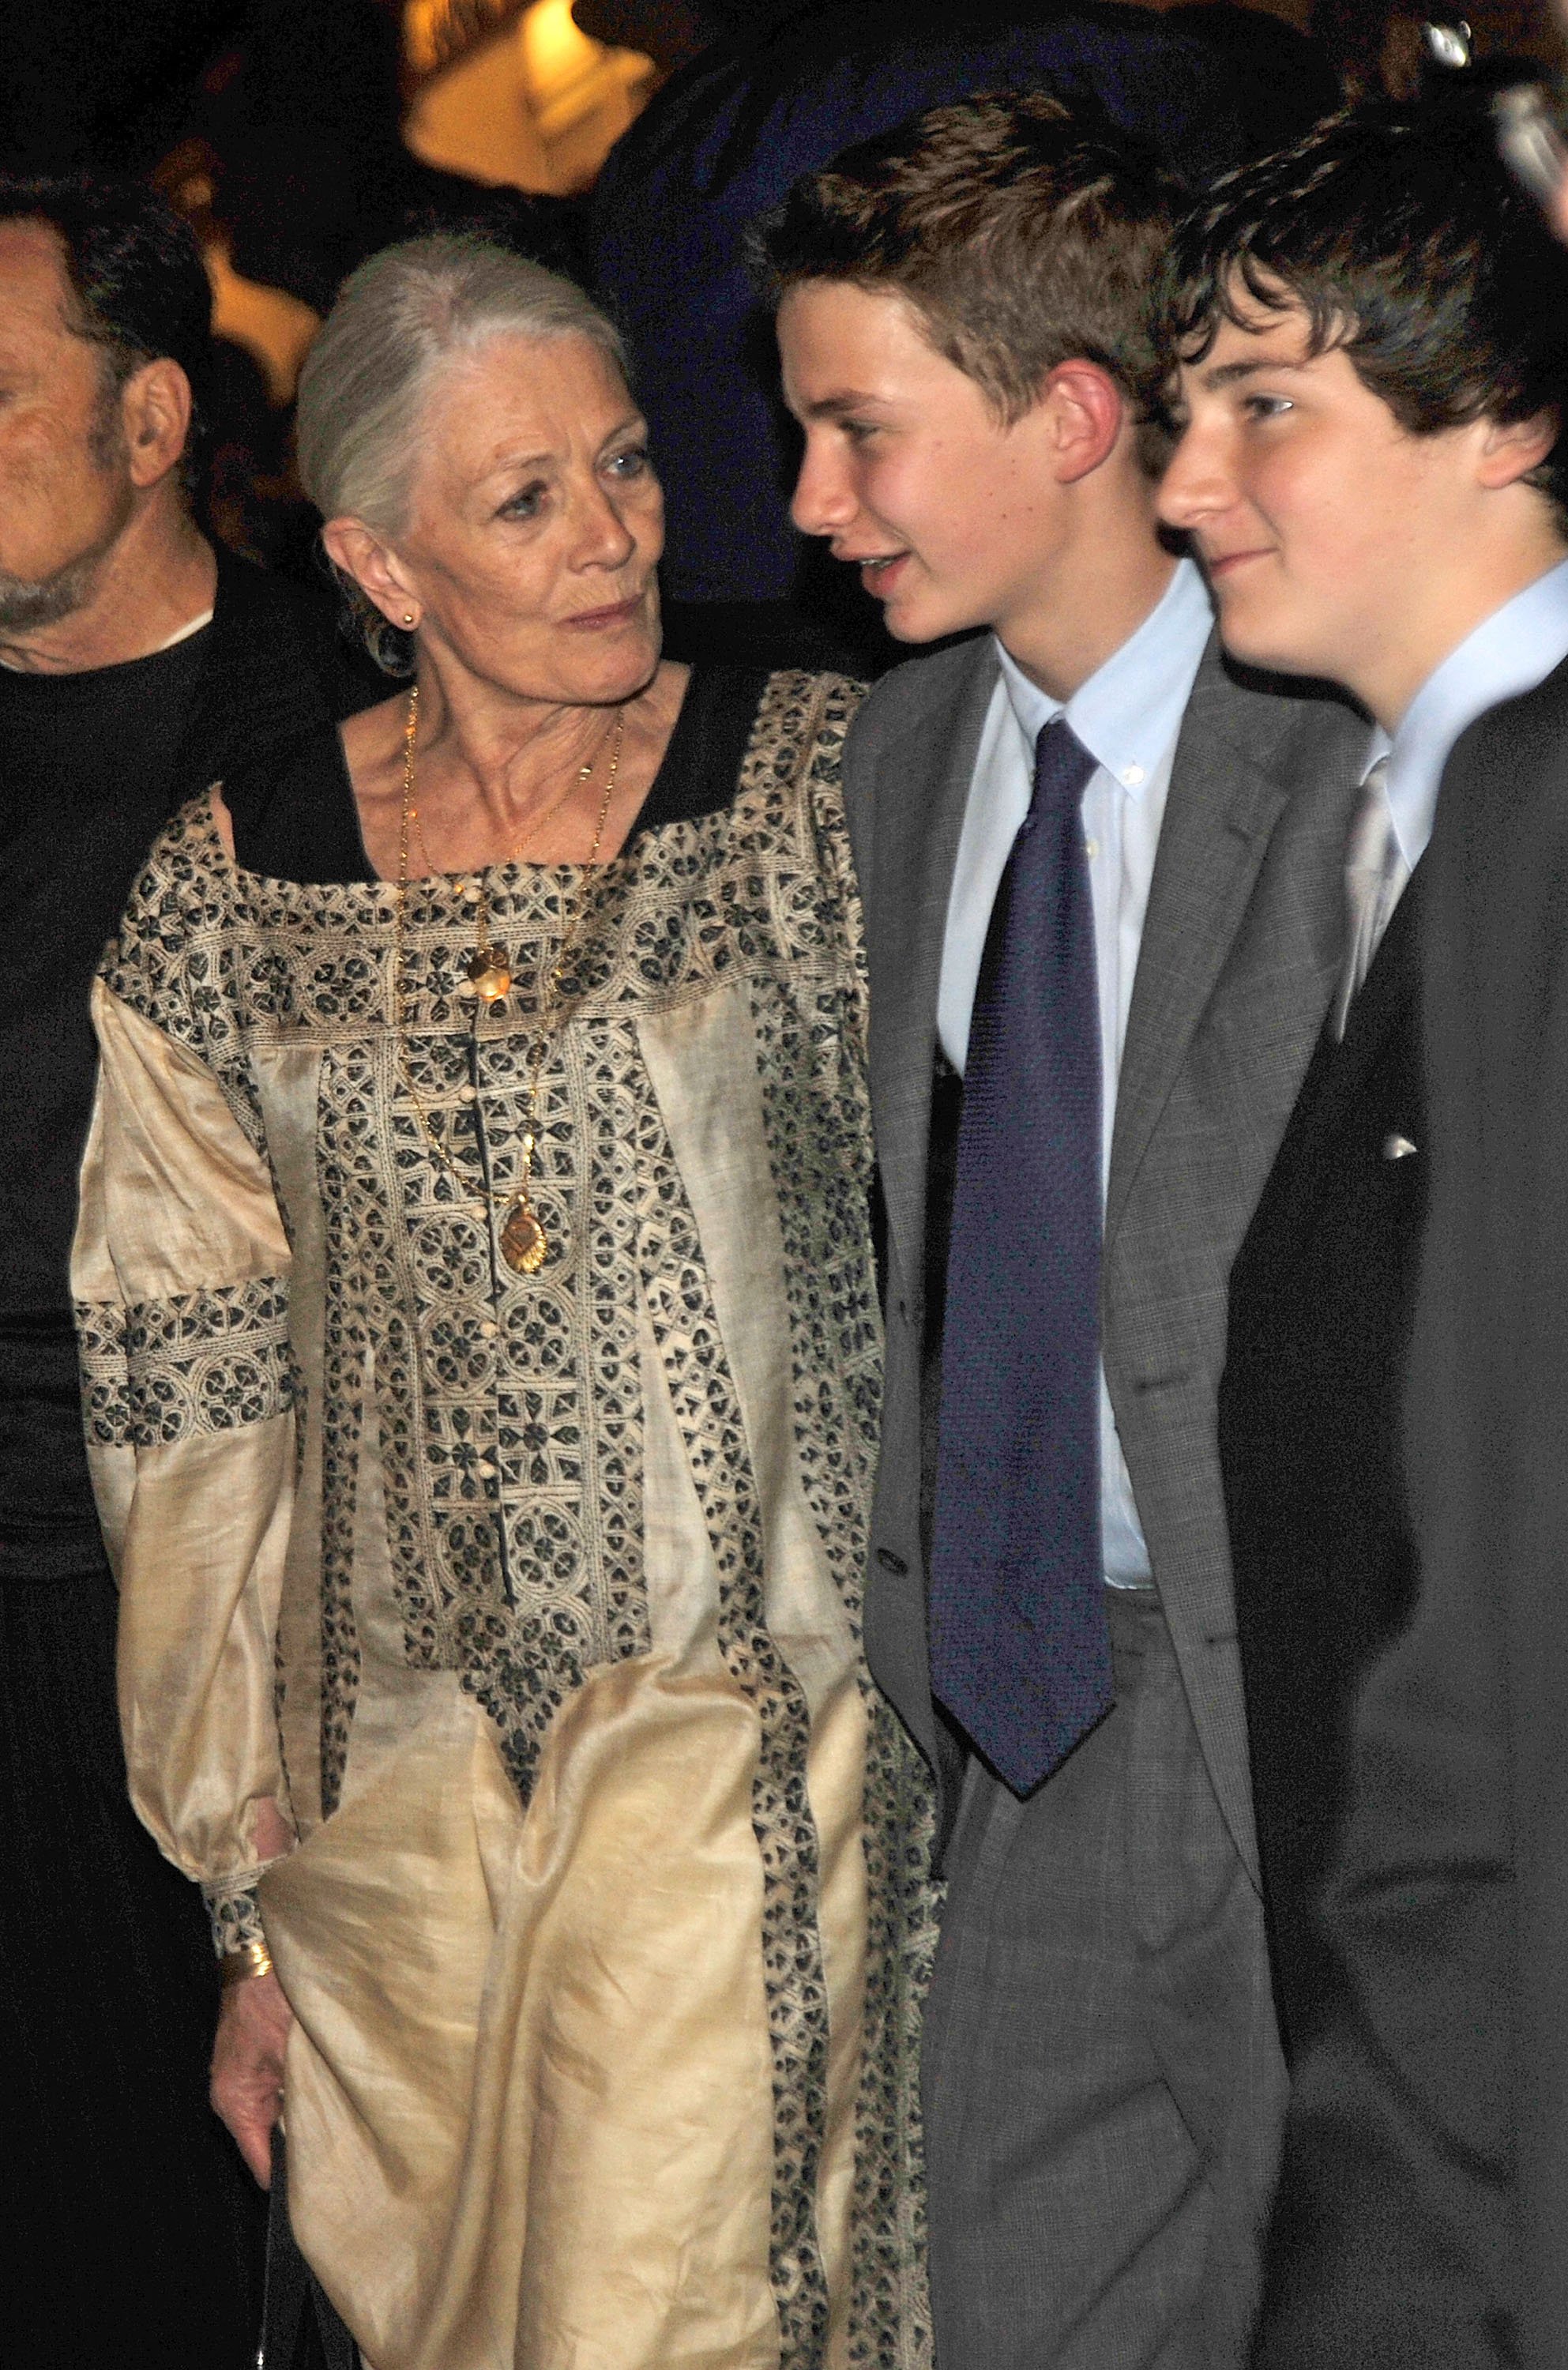 Actress Vanessa Redgrave and her grandsons. Micheal Neeson and Daniel Neeson, pictured leaving the Almay Concert to celebrate the Rainforest Fund's 21st birthday at Carnegie Hall in Manhattan on May 13, 2010 in New York City. / Source: Getty Images